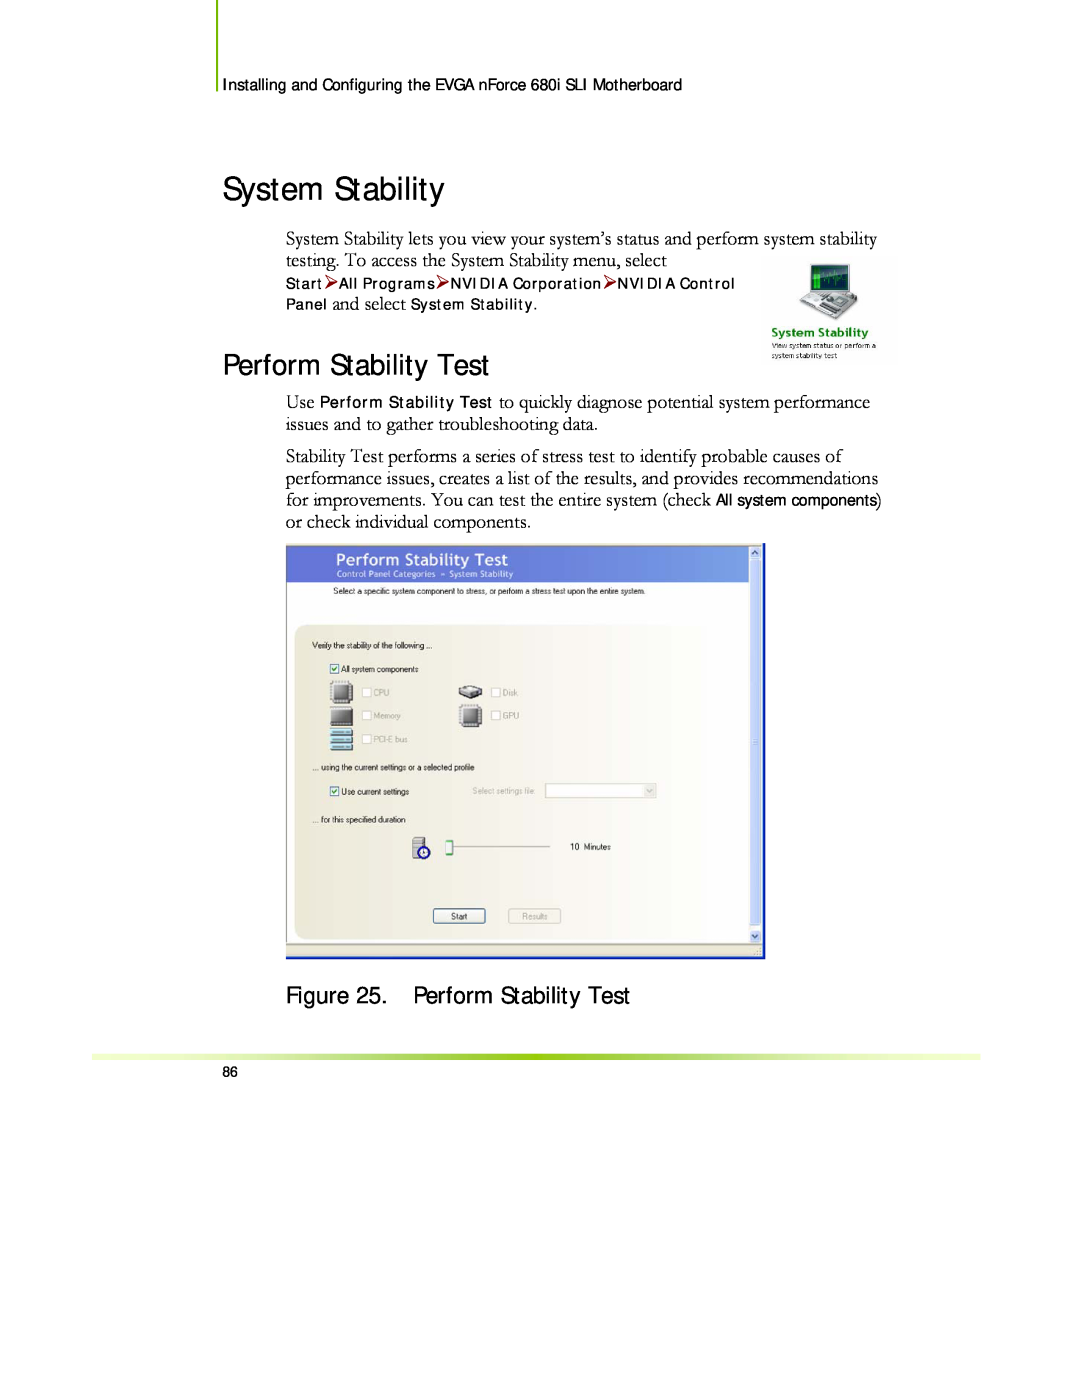 EVGA 122-CK-NF68-XX manual System Stability, Perform Stability Test, Start¾All Programs¾NVIDIA Corporation¾NVIDIA Control 